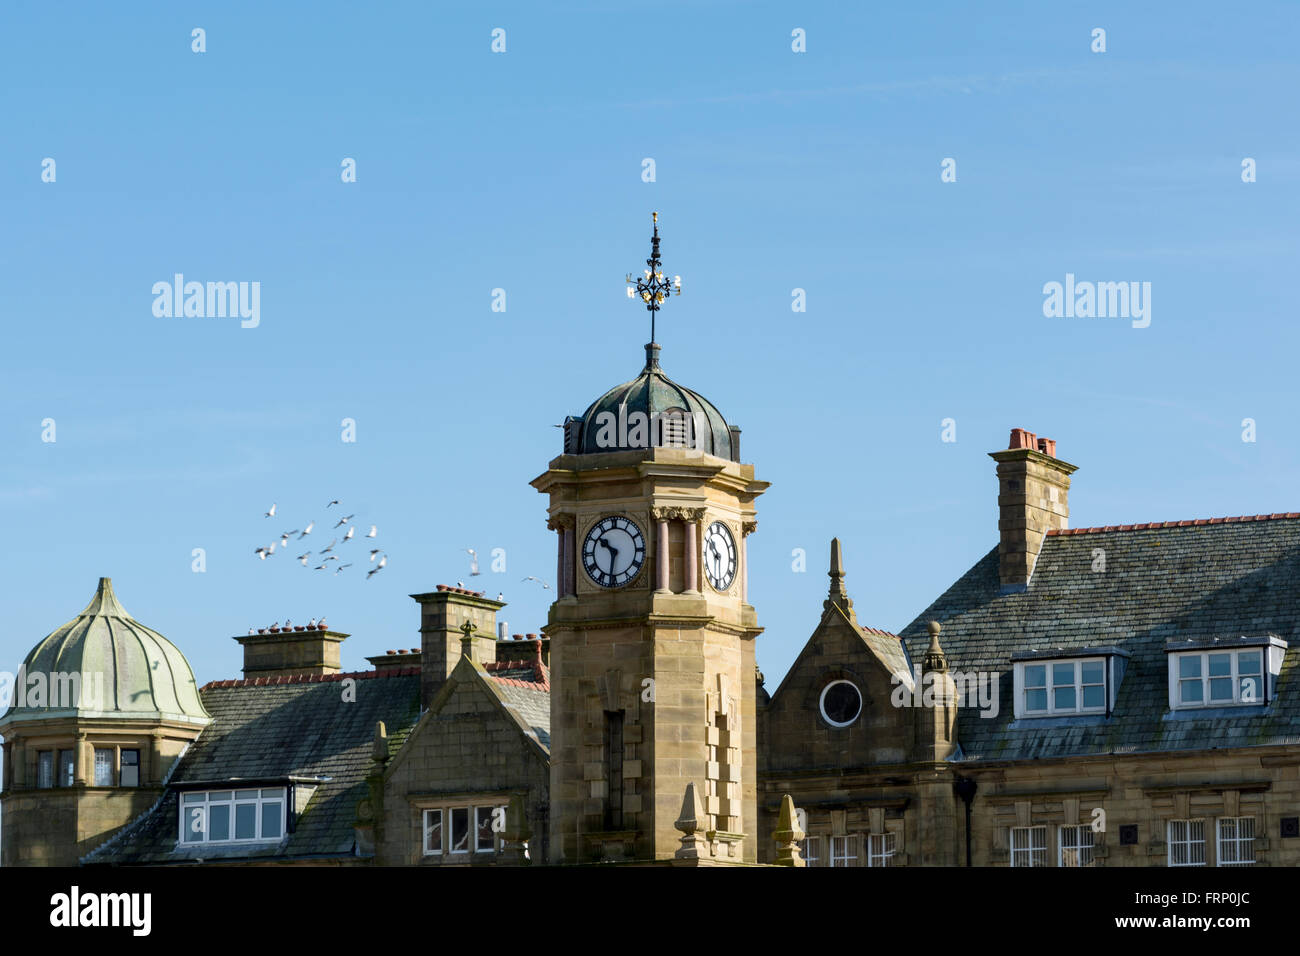 The Towngate, Town square, with the town clock in the Lancashire market town of Great Harwood, Lancs, UK Stock Photo